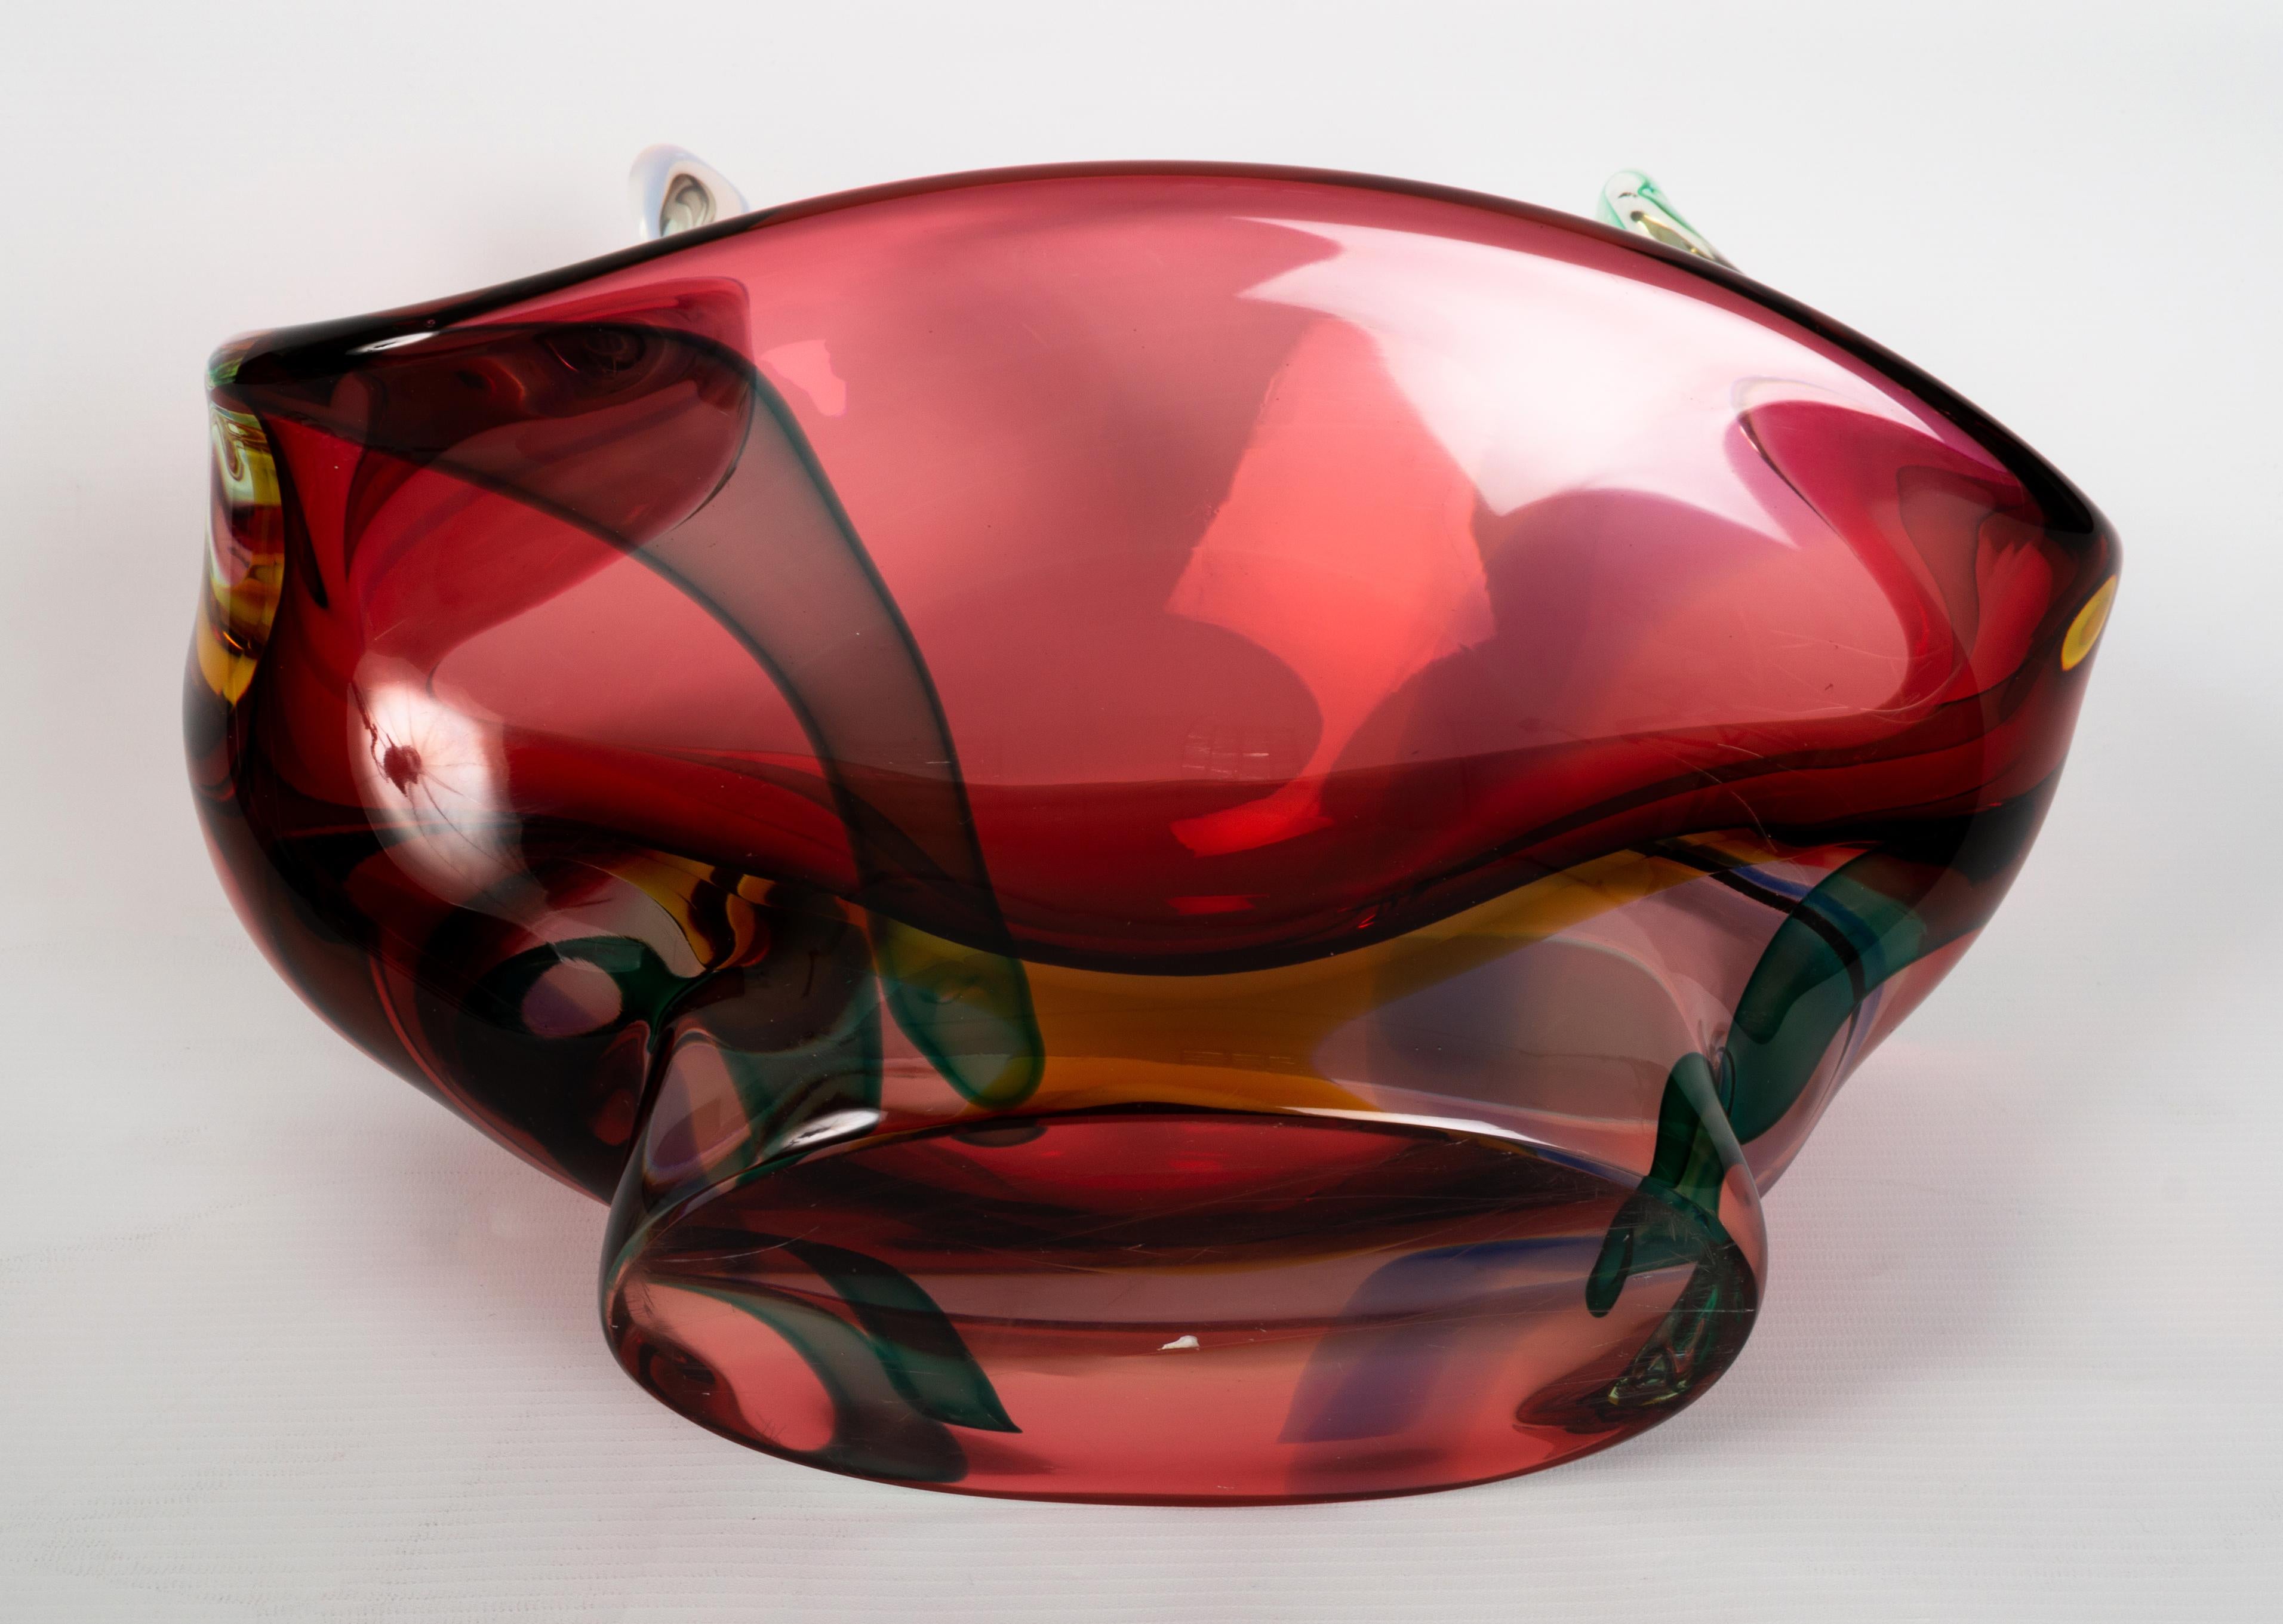 Large Murano Archimede Seguso Art Glass Centre Piece, Italy, C.1960 For Sale 3